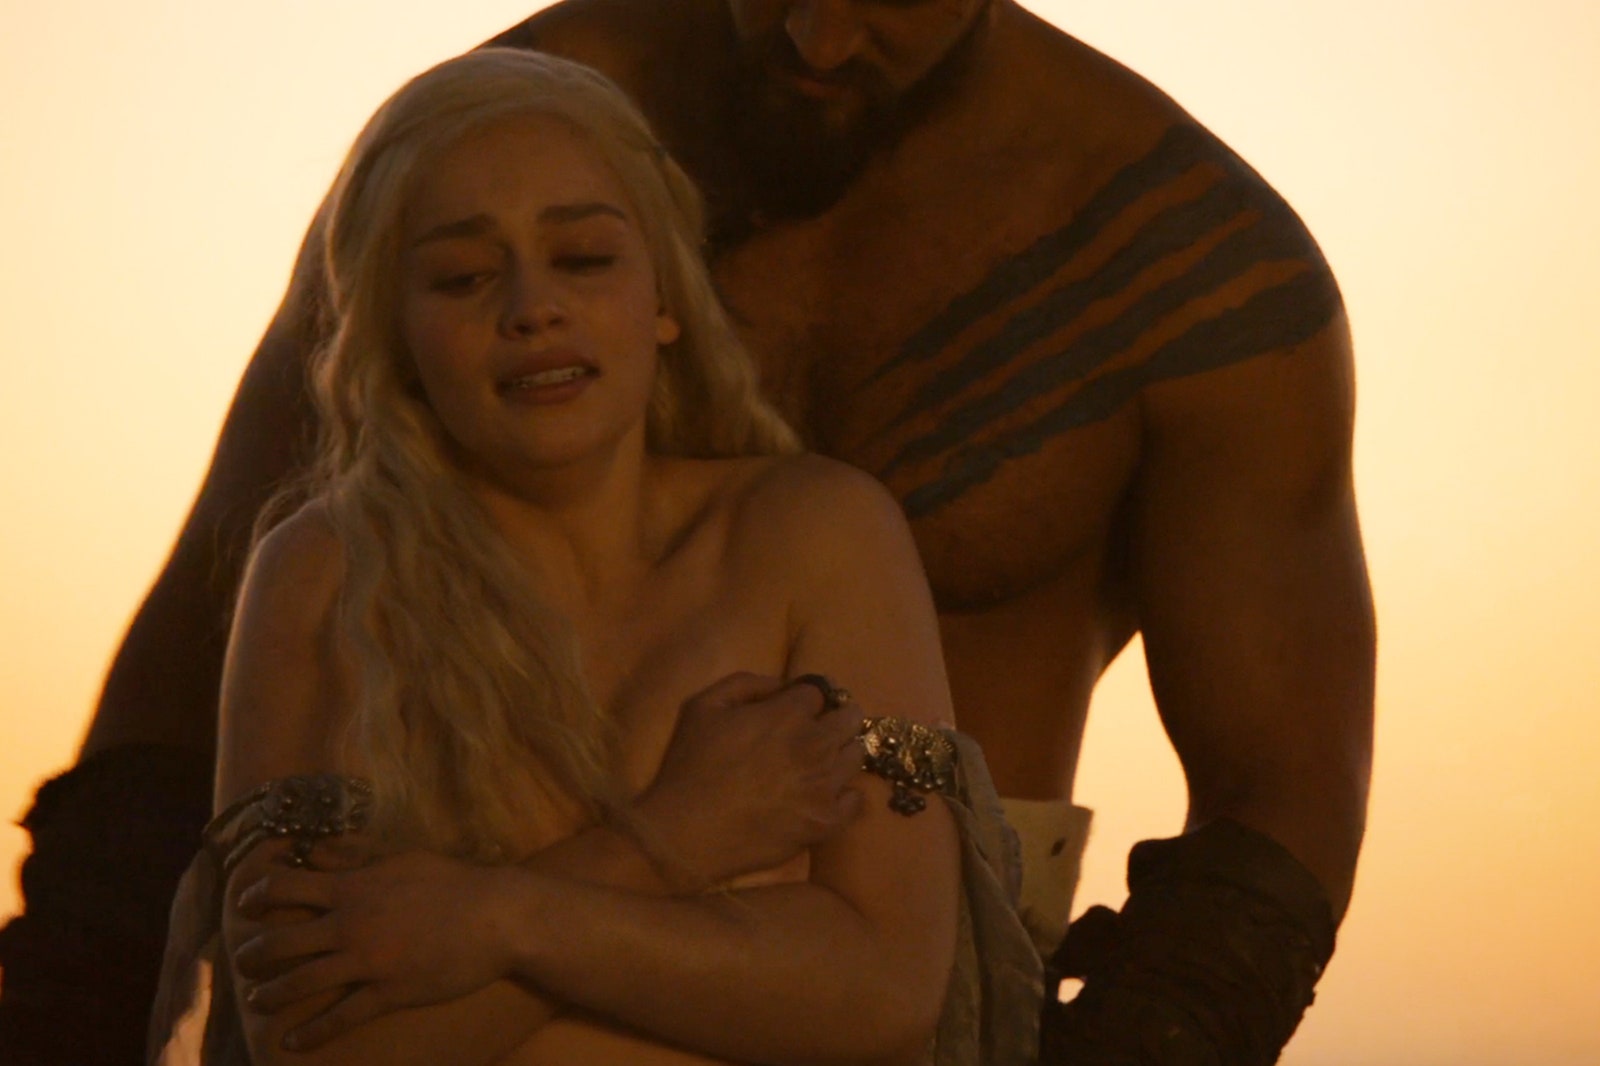 amy slama recommends Dragon Lady Game Of Thrones Naked